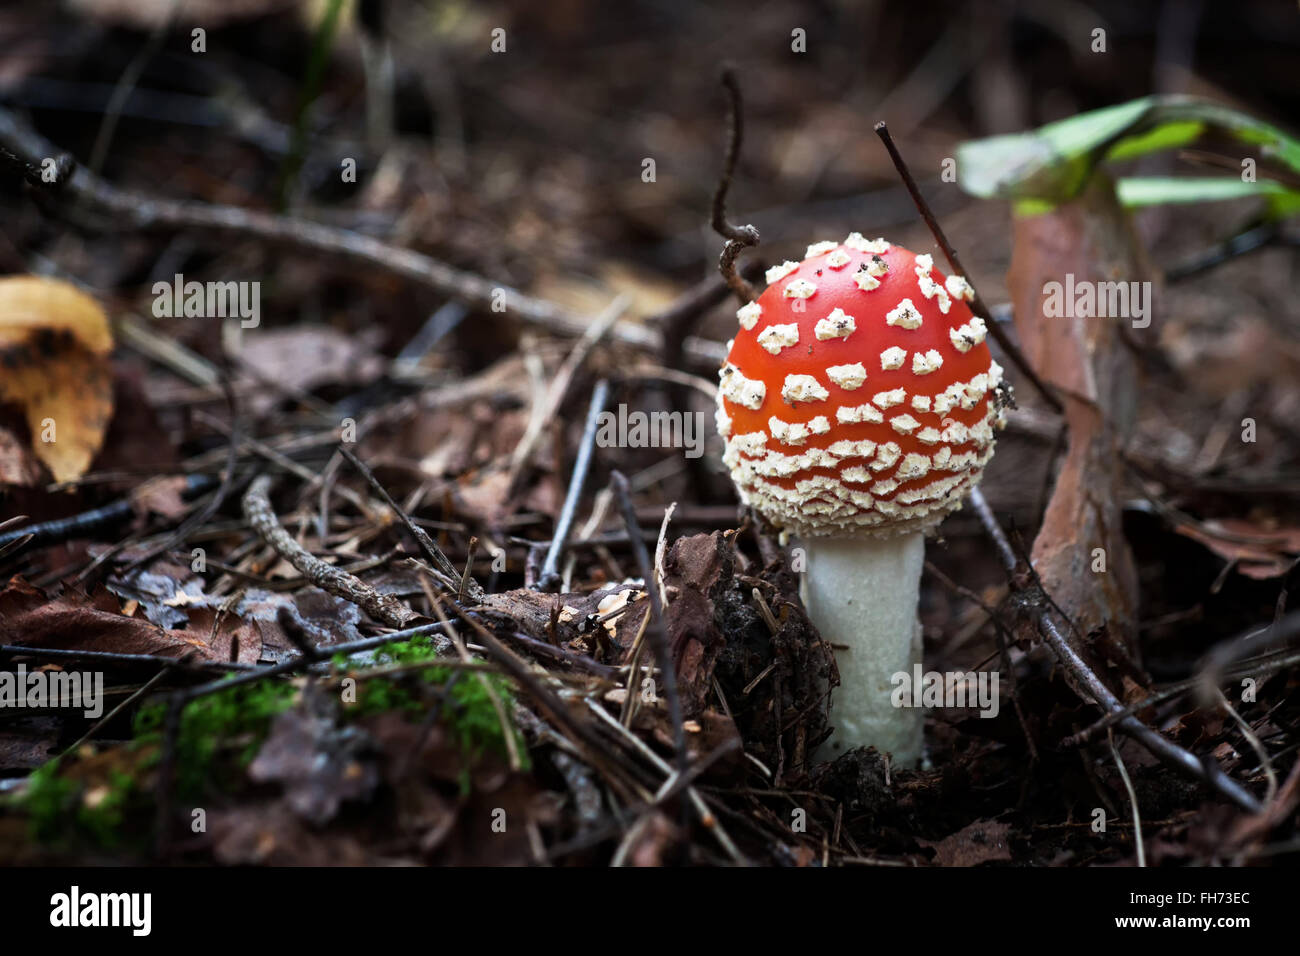 A fly amanita mushroom in it's natural place of growth. Stock Photo